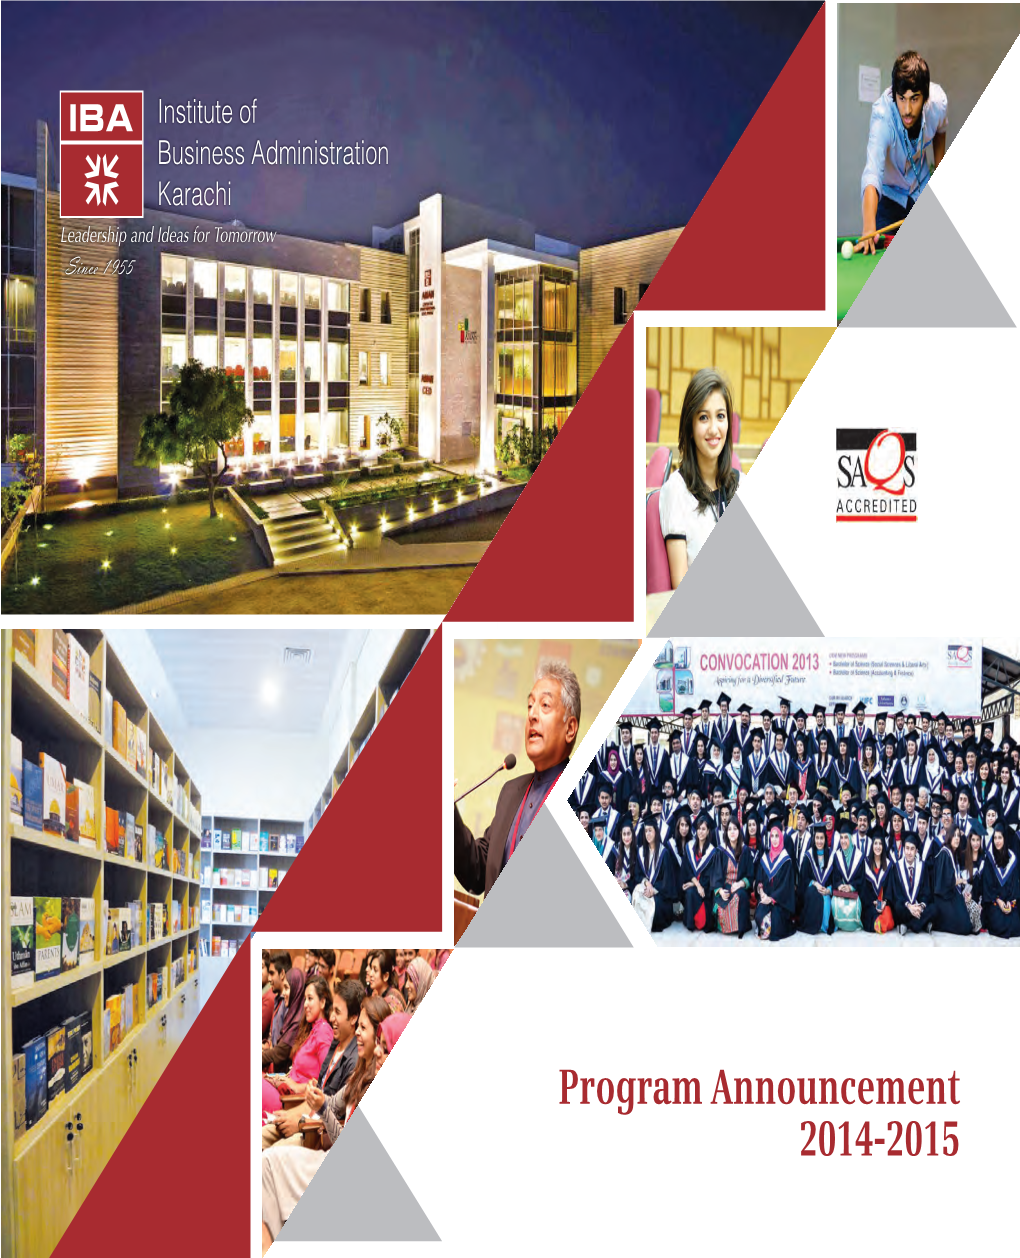 Program Announcement 2014-2015 Milestones in the Journey of Excellence